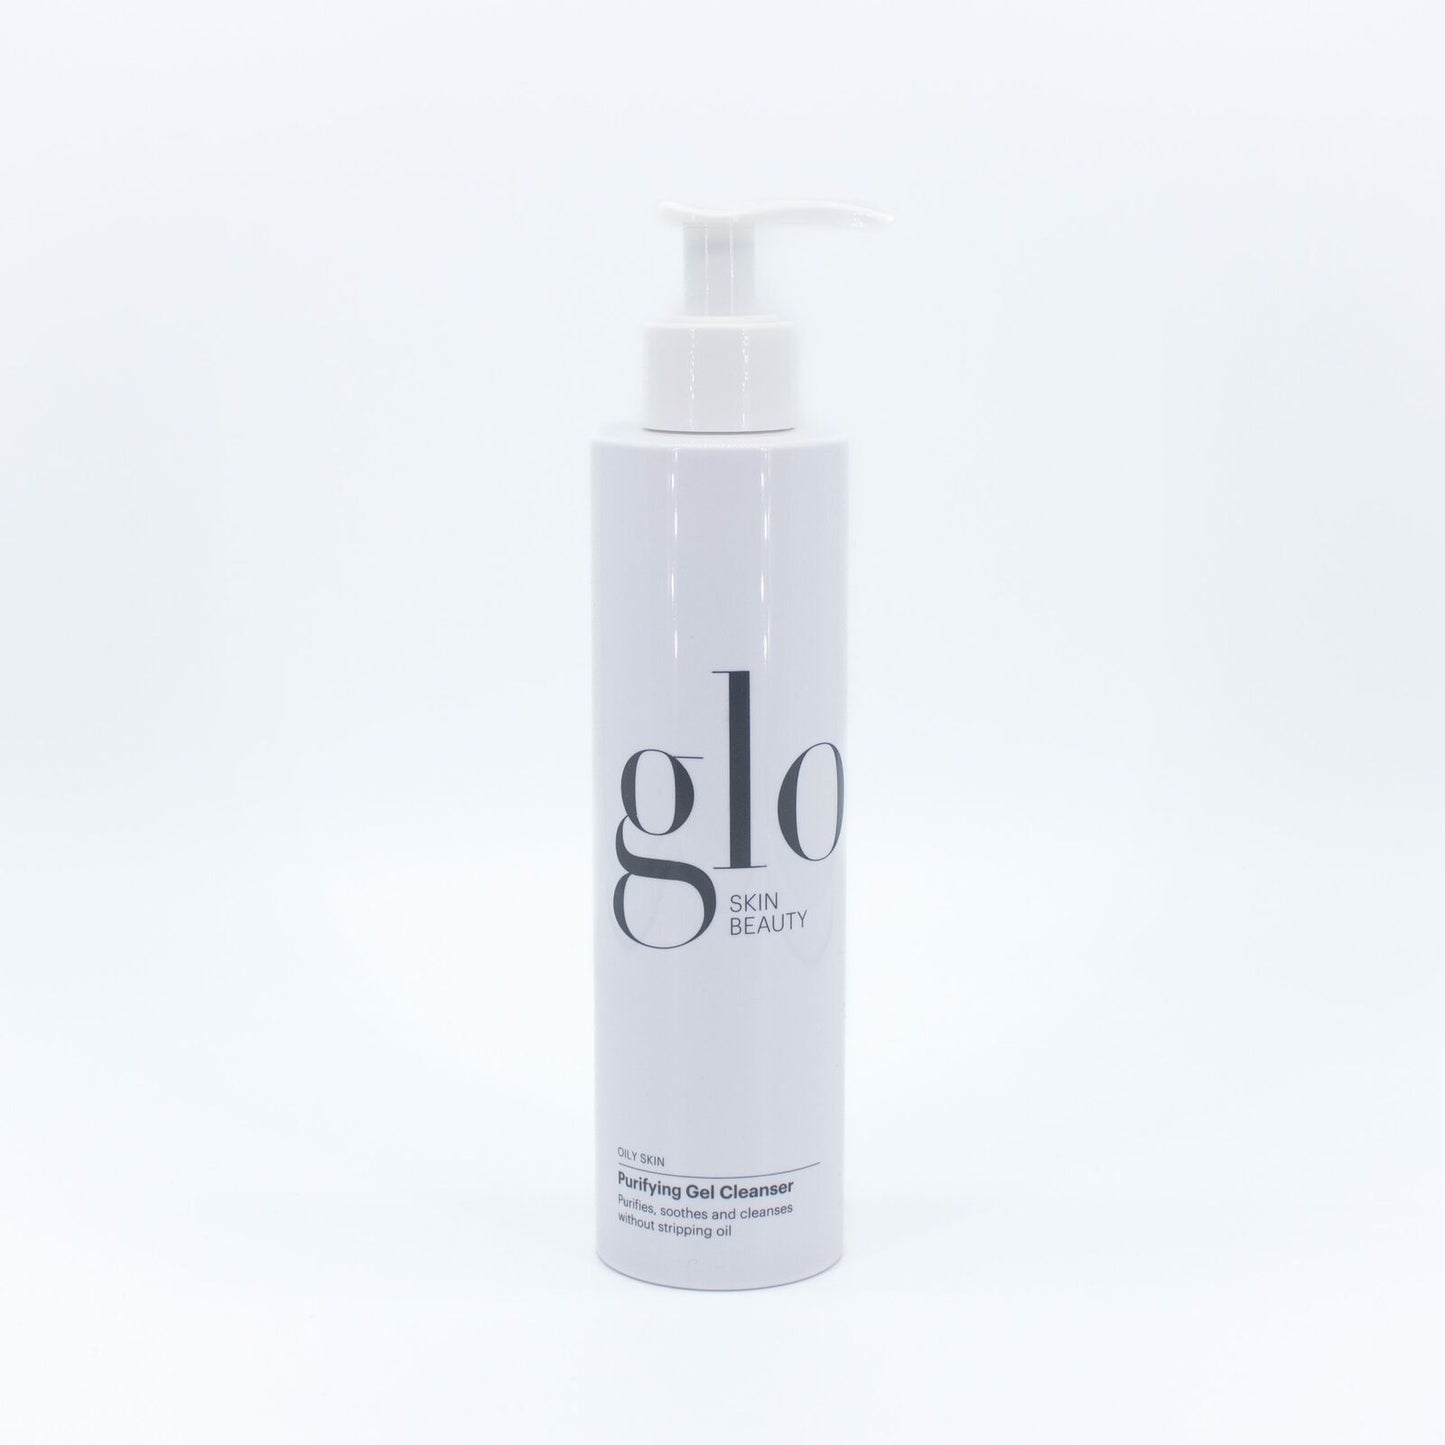 glo SKIN BEAUTY Purifying Gel Cleanser 6.7oz - Imperfect Box